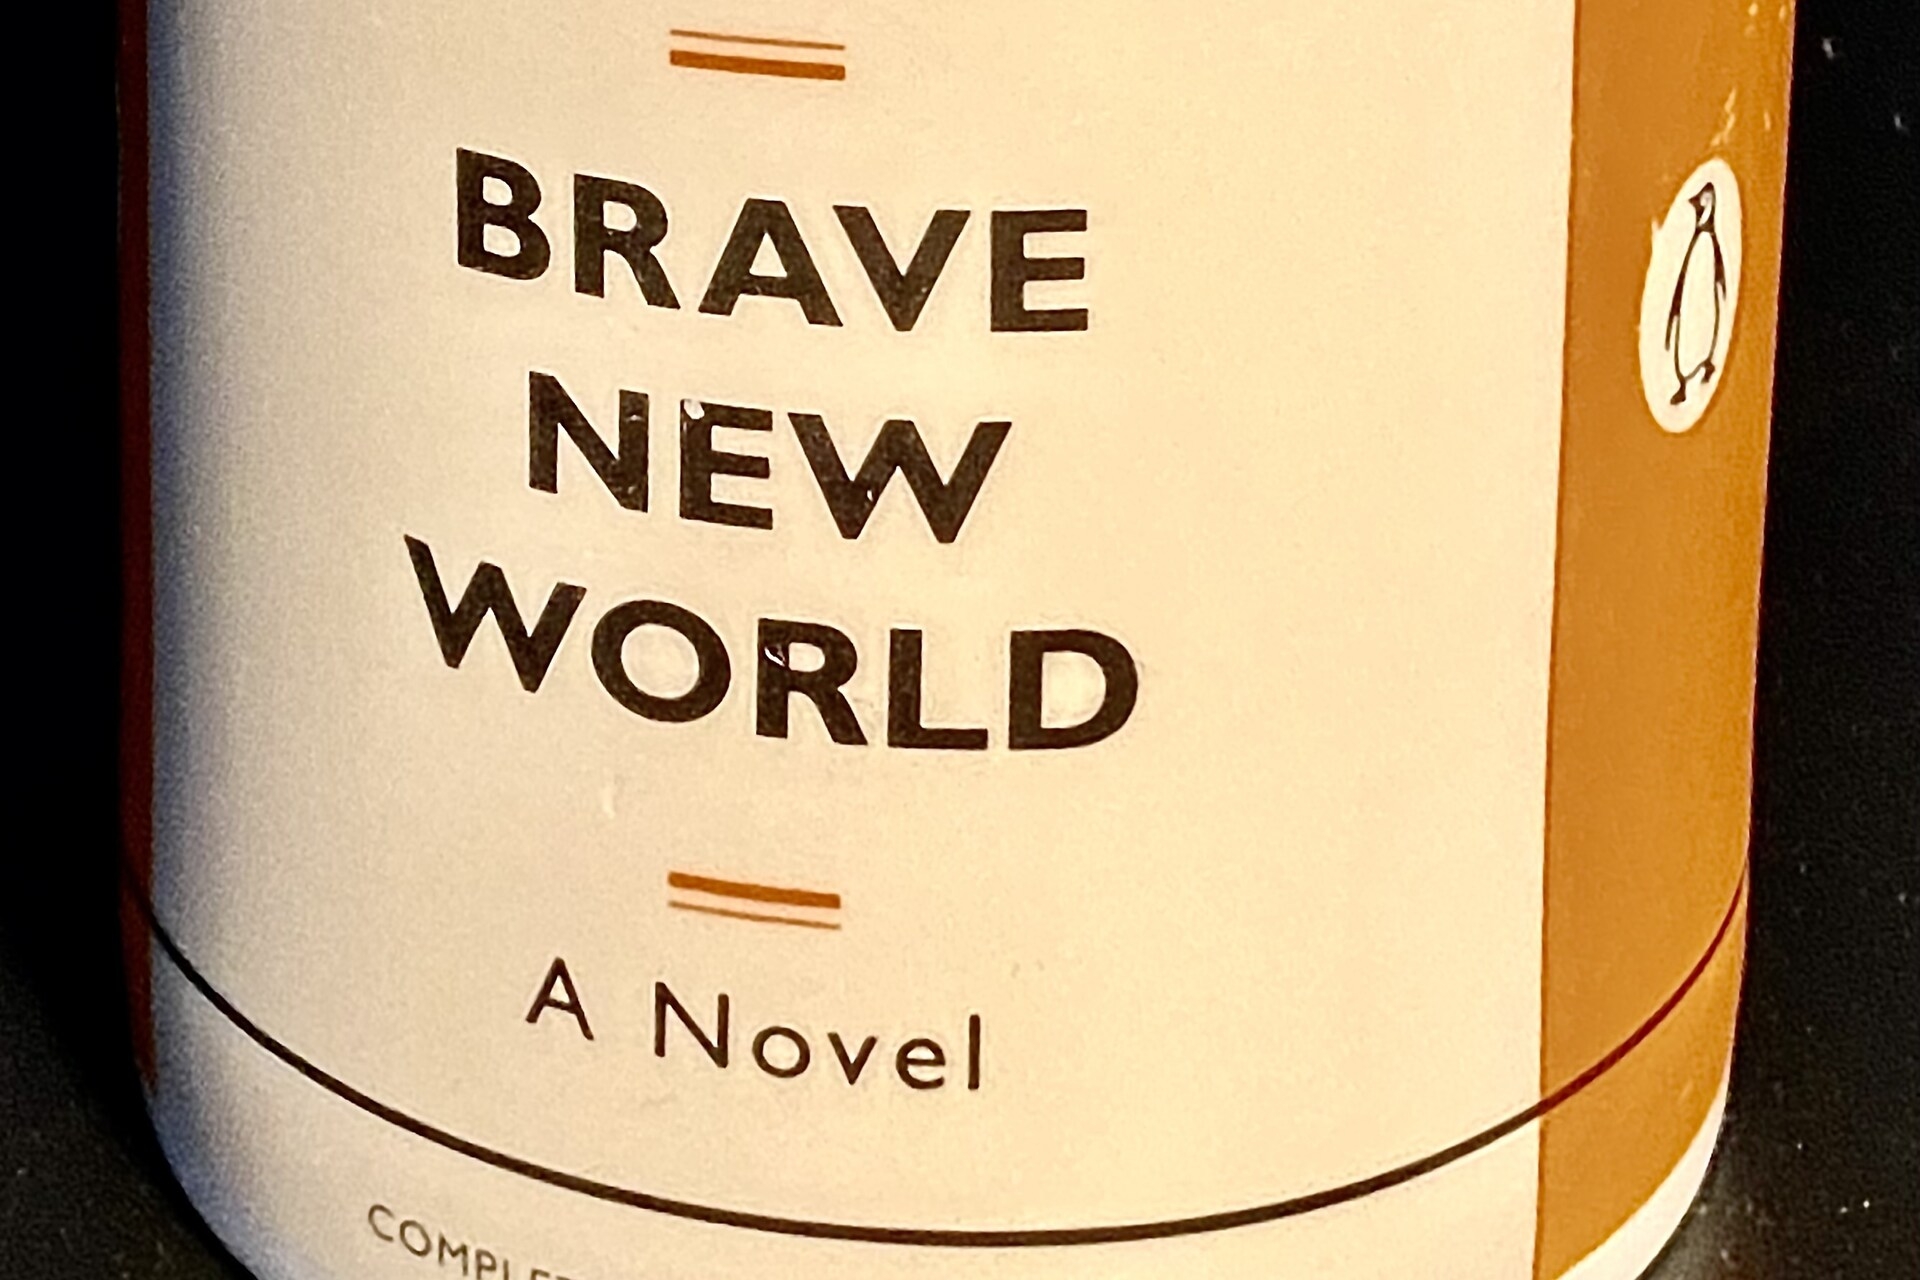 The innovation and history of The Brave New World